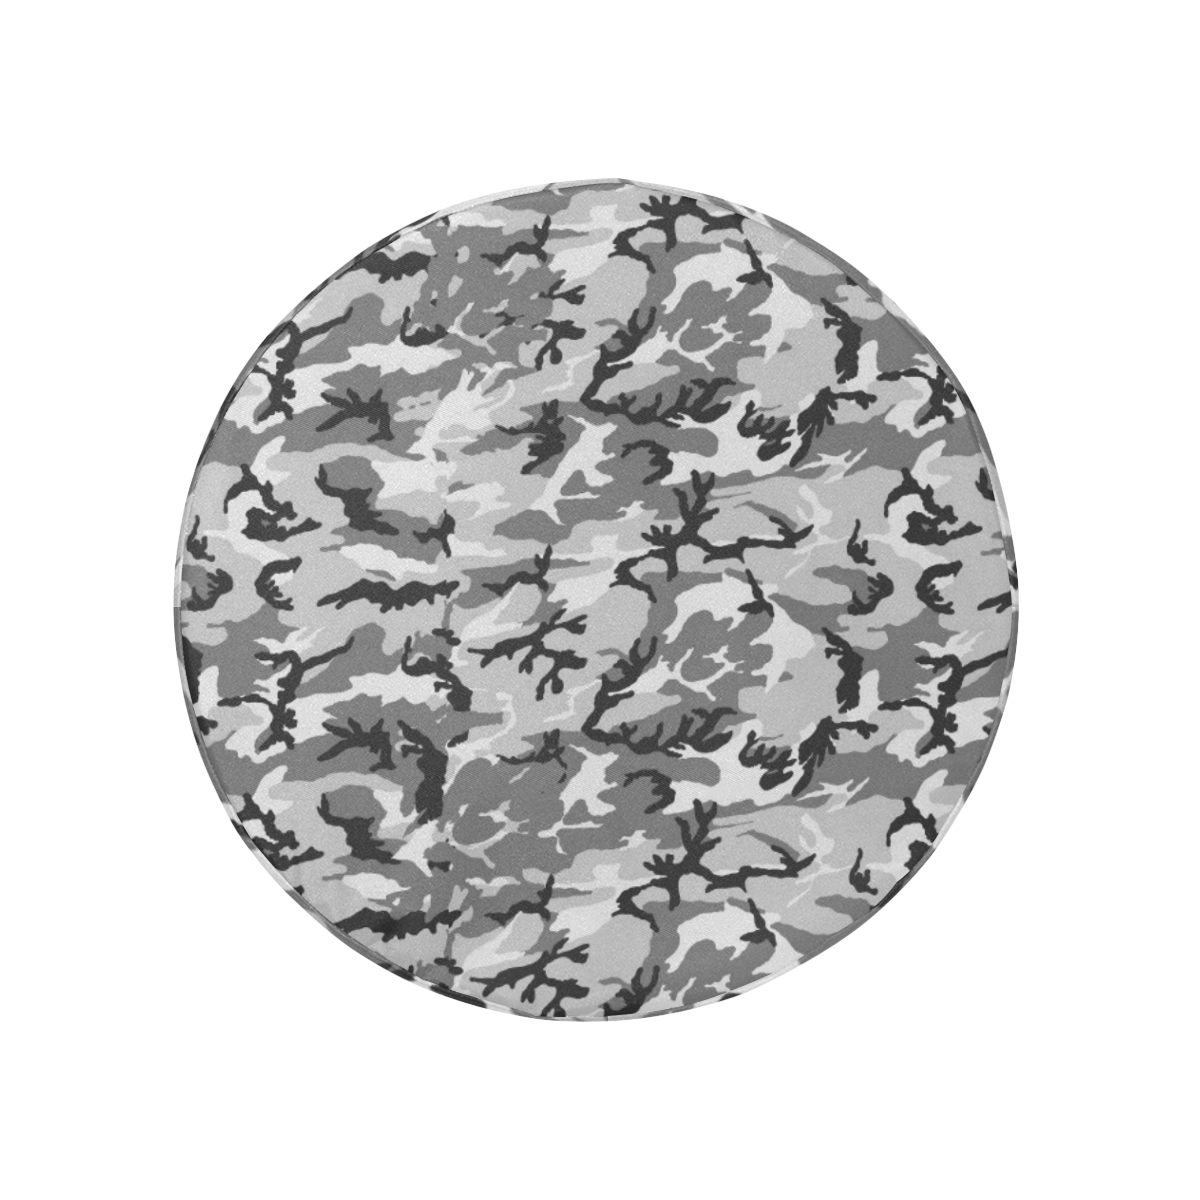 Woodland Urban City Black/Gray Camouflage 32 Inch Spare Tire Cover